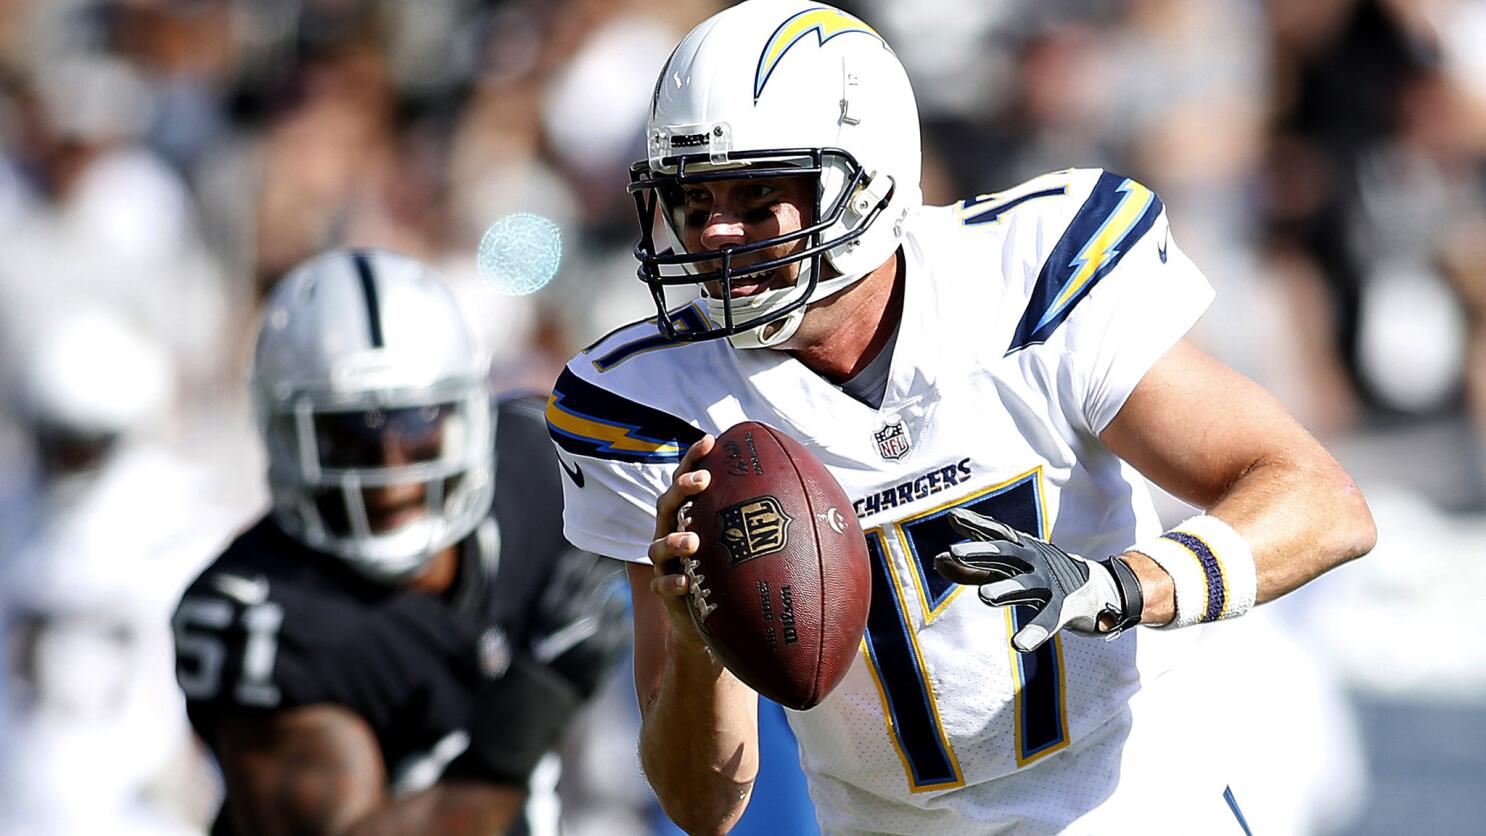 Chargers' finale will feature some silver, black and boos when